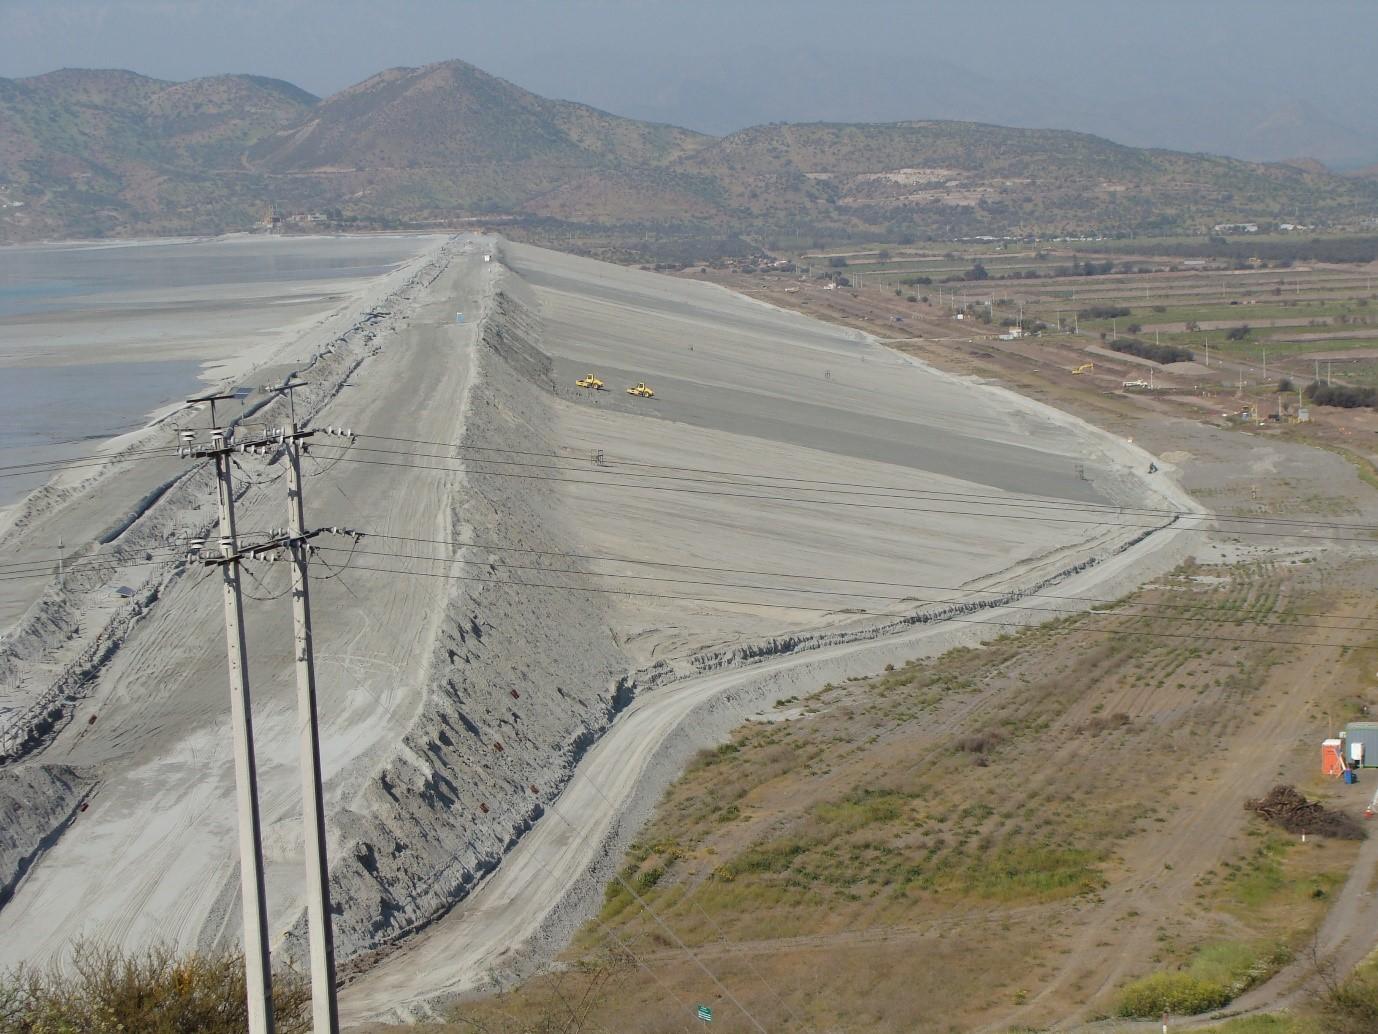 The 4-km-long and 50-m-high Ovejería sand tailings dam north of Santiago, Chile. Photograph: Stephen Edwards, 2016